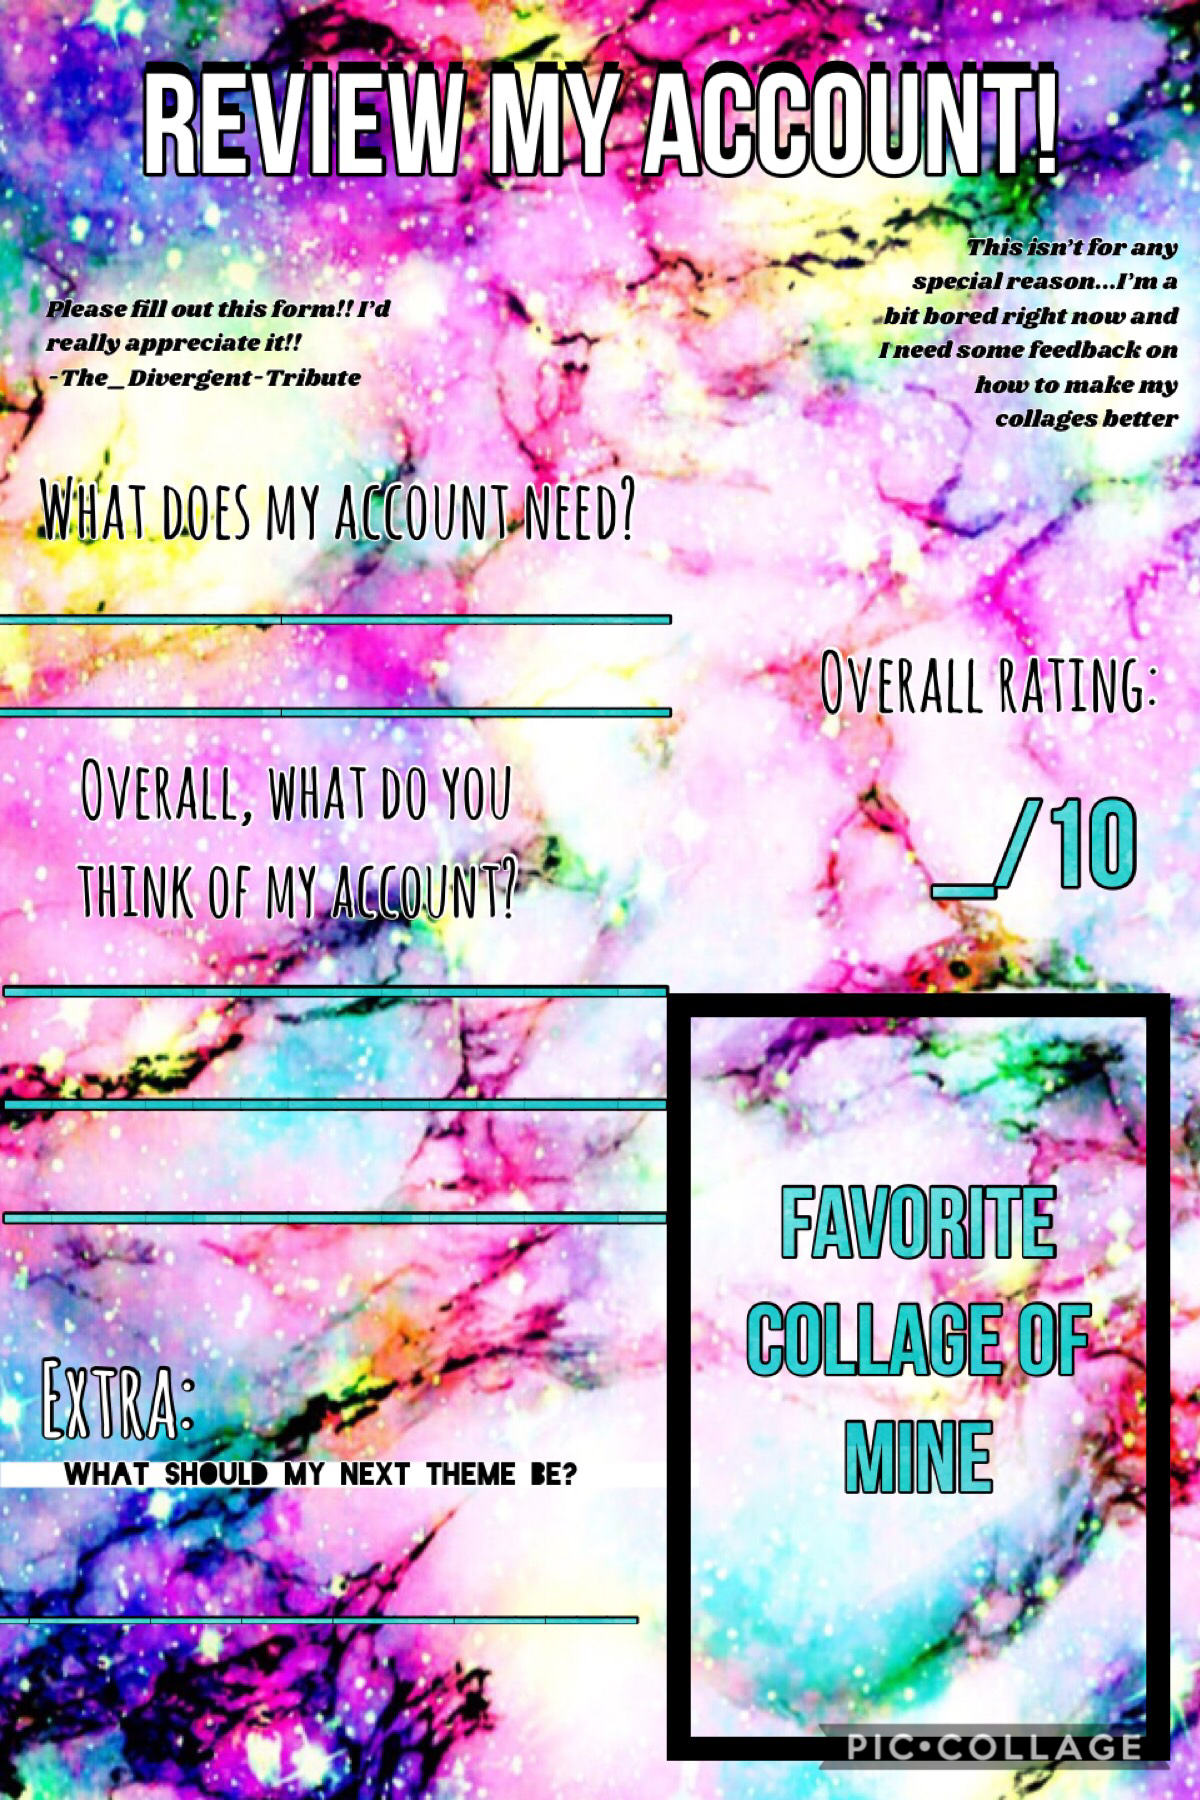 I know it looks really unorganized, but I’d appreciate it if y’all could fill this out. I’m really out of inspiration so this would be nice...and I also want to see y’all’s opinion of my account. Thanks! ❤️❤️